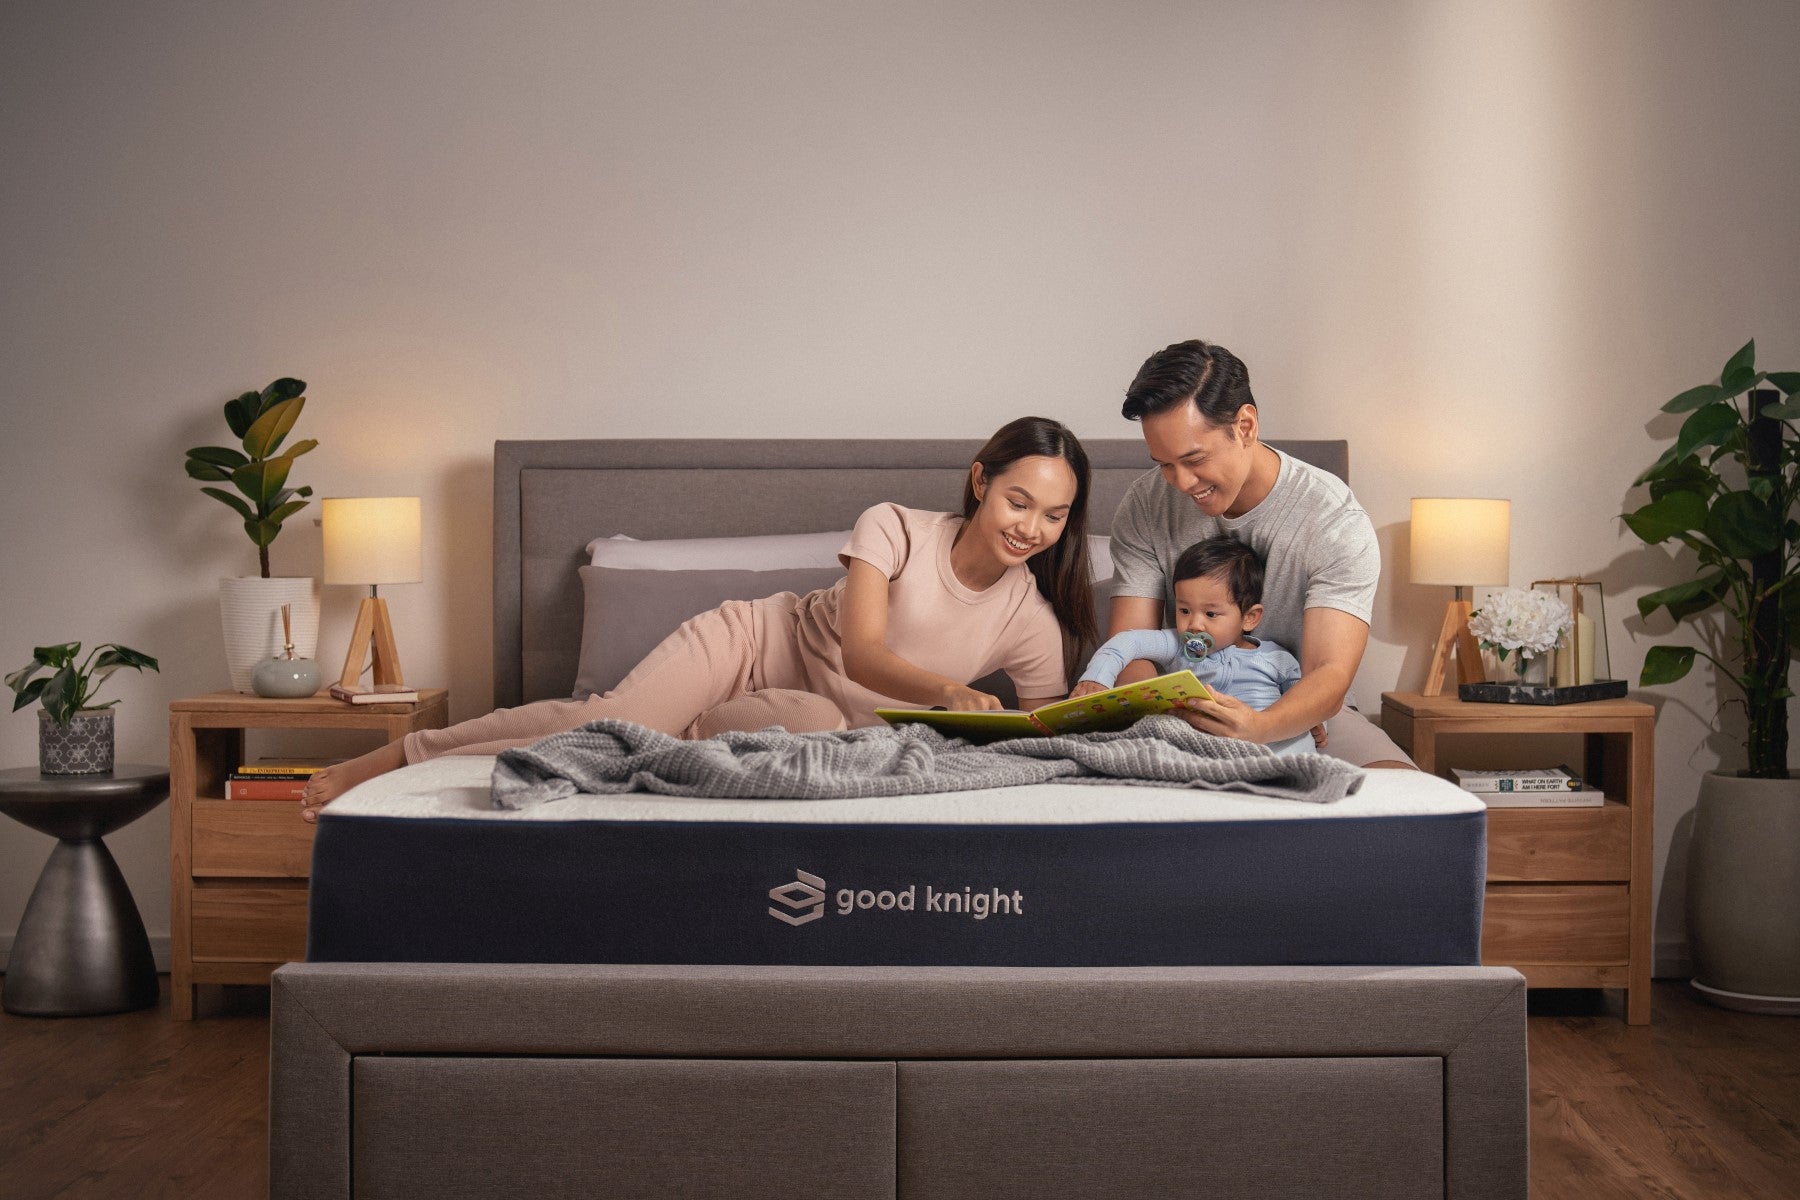 Happy family moment on a Good Knight Athena mattress: A smiling family of three, including both parents and their little toddler, reading a bedtime story book, enjoying a moment of comfort and togetherness.